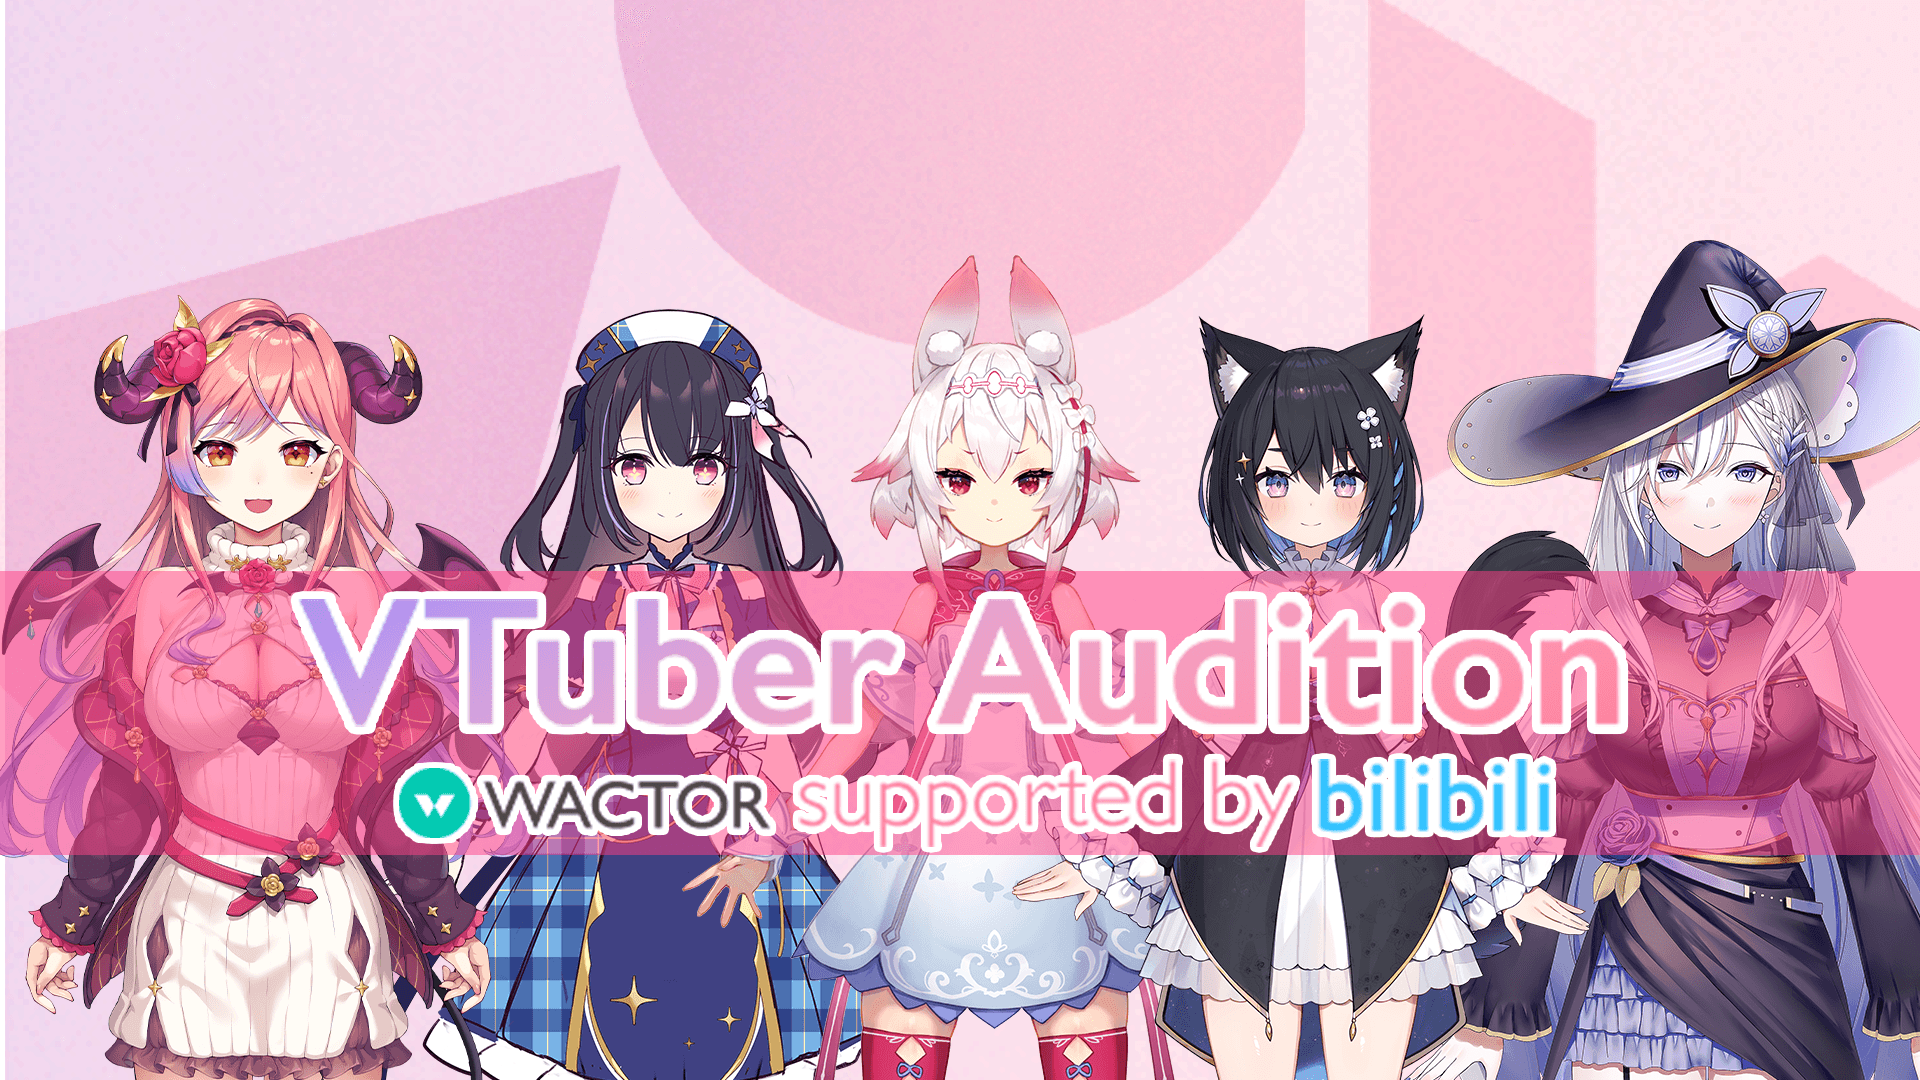 WACTOR VTuber Audition supported by bilibili (1)